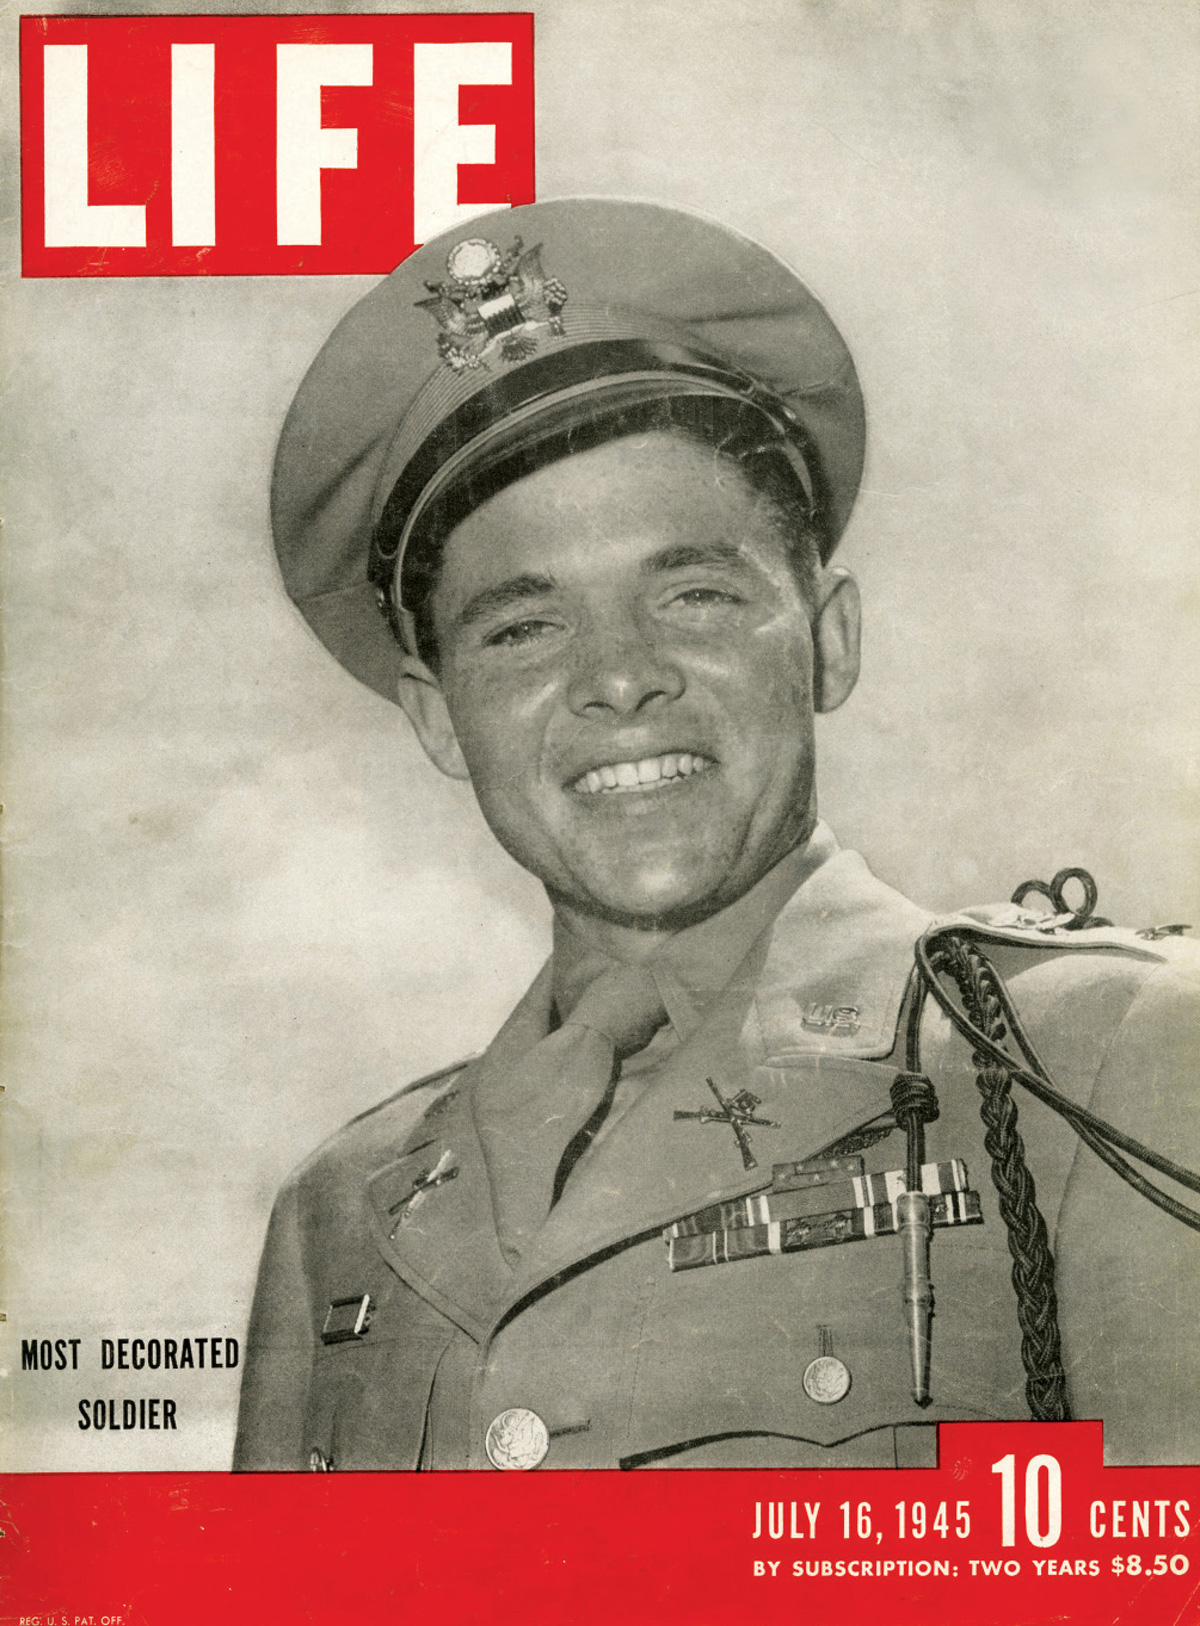 A cover of Life Magazine from the 16th of July 1945 showing a photograph of  Audie Murphy with the caption “Most Decorated Soldier Comes Home to the Little Town of Farmsville, Texas.”